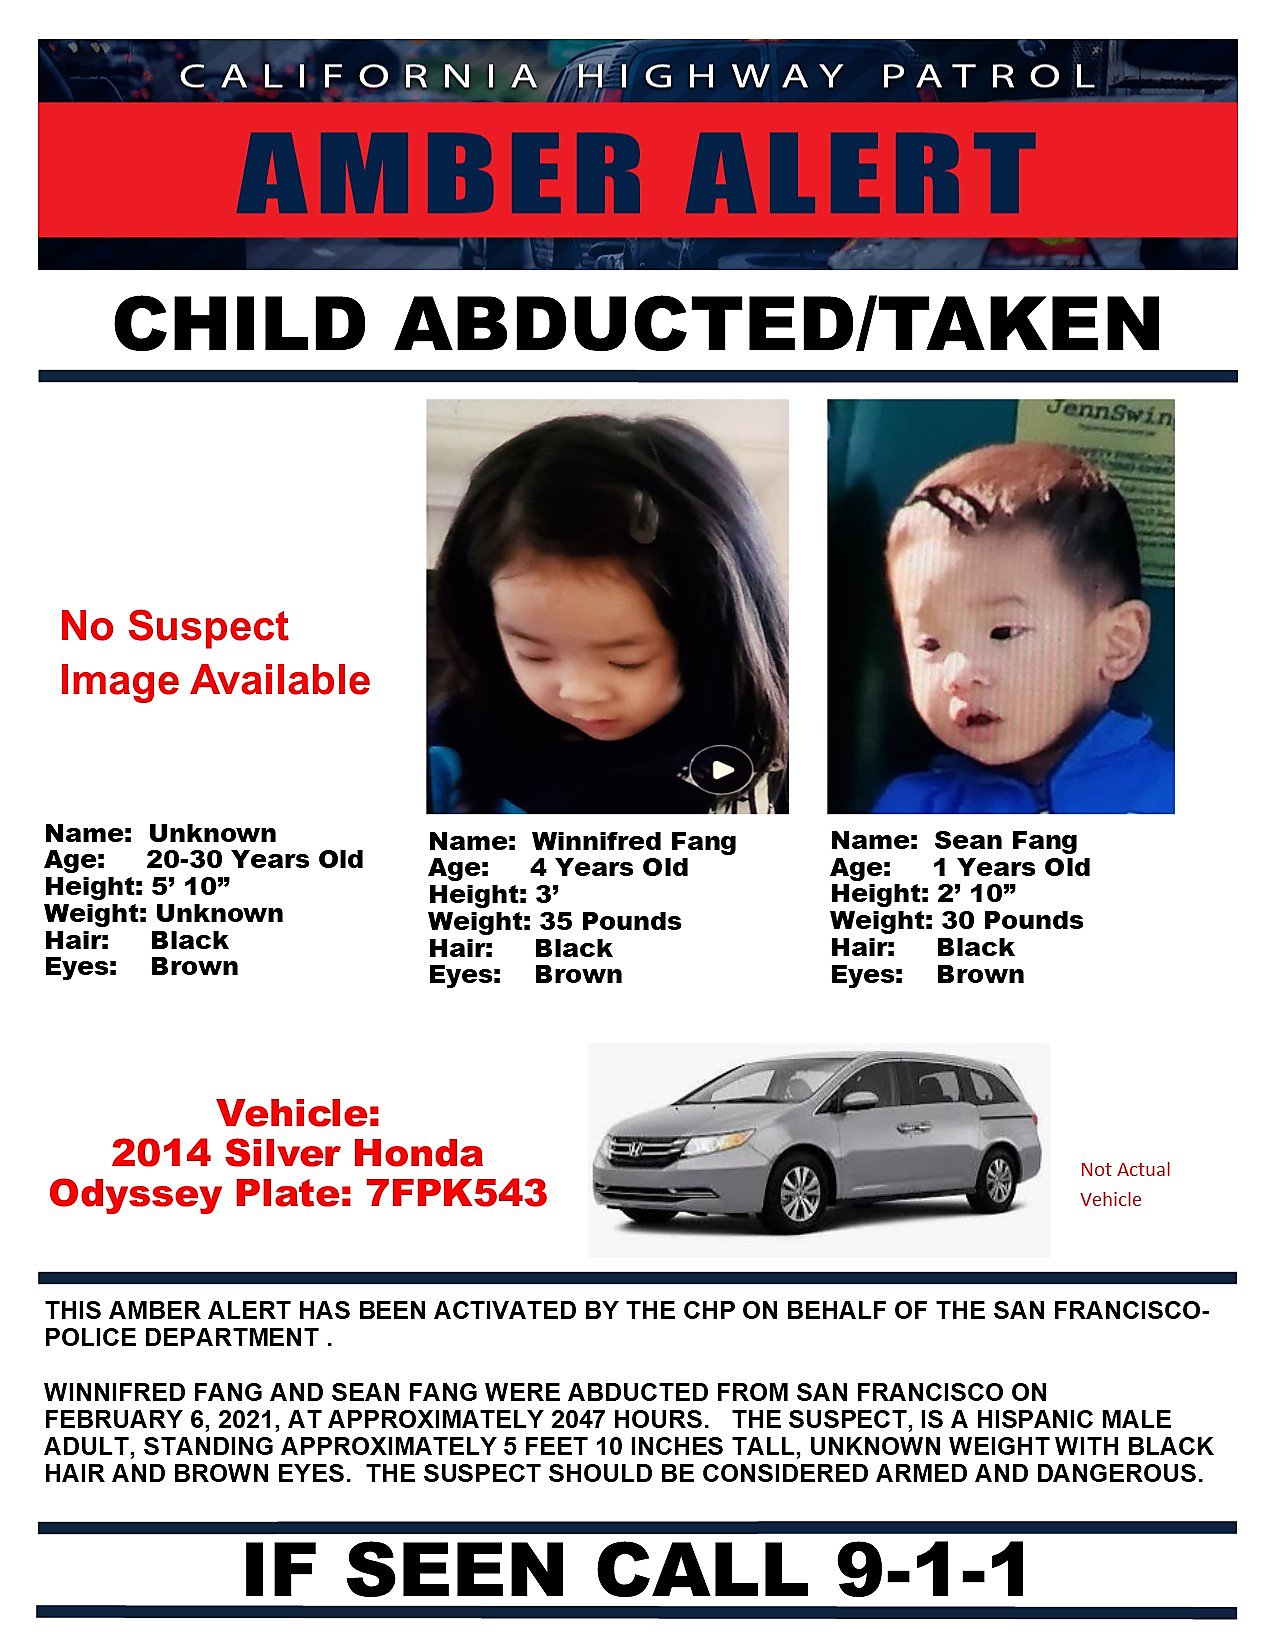 Man who drove away with 2 children in stolen minibus in SF, remains at large